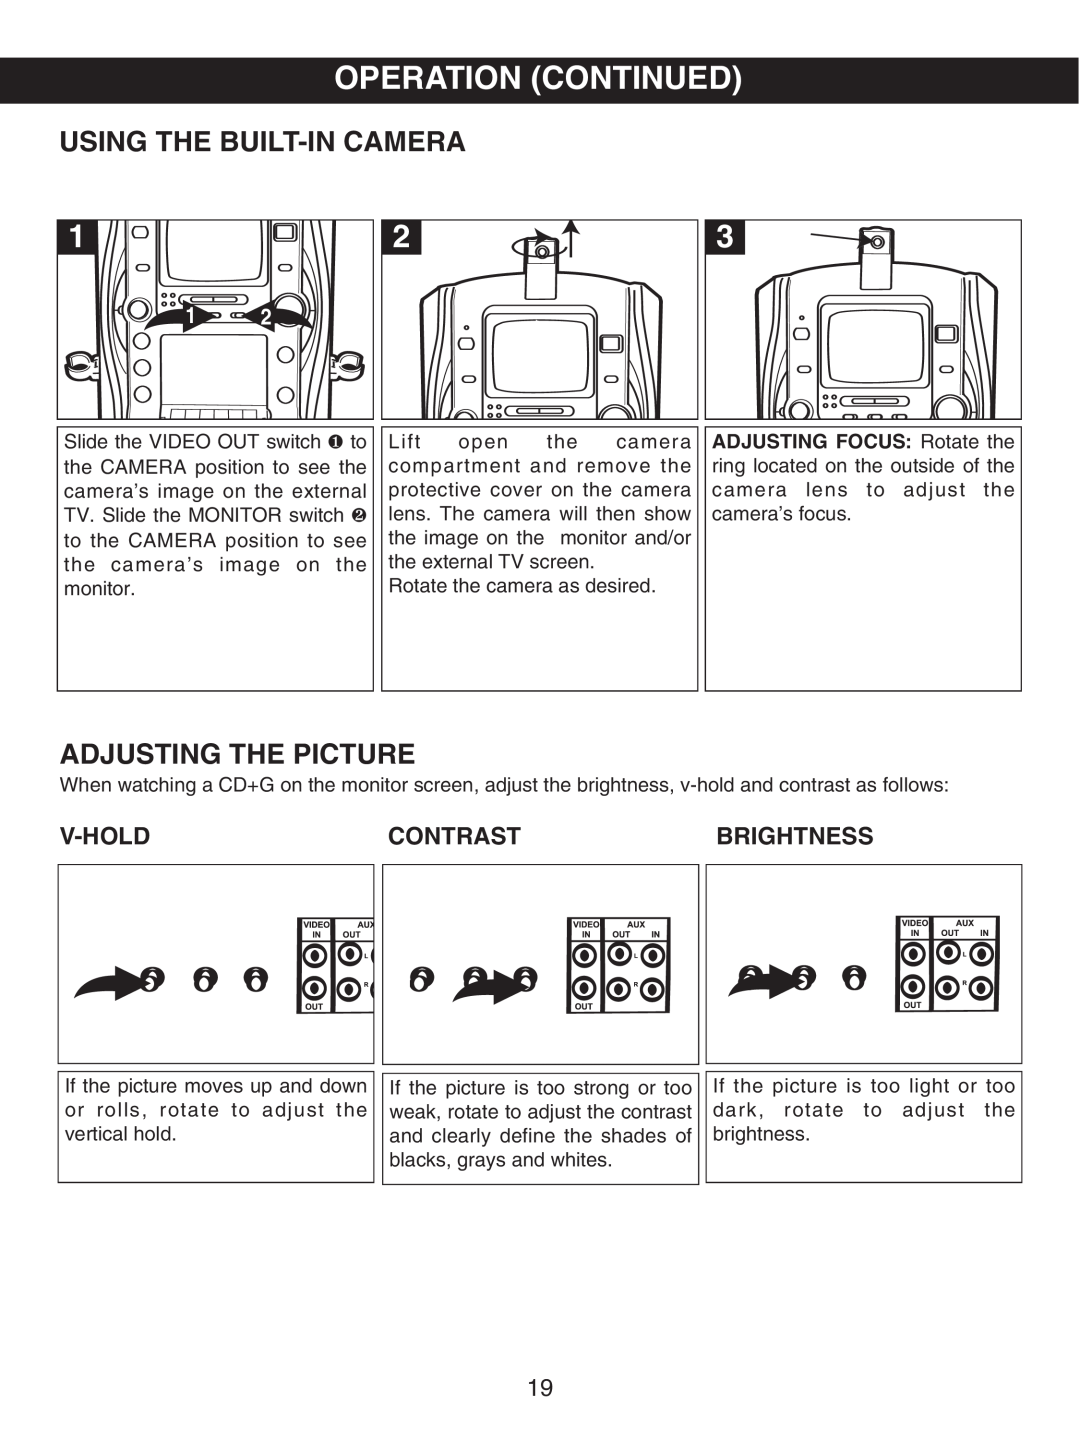 Memorex MKS8503 manual Using The Built-Incamera, Adjusting The Picture, V-Hold, Contrast, Brightness, Operation Continued 